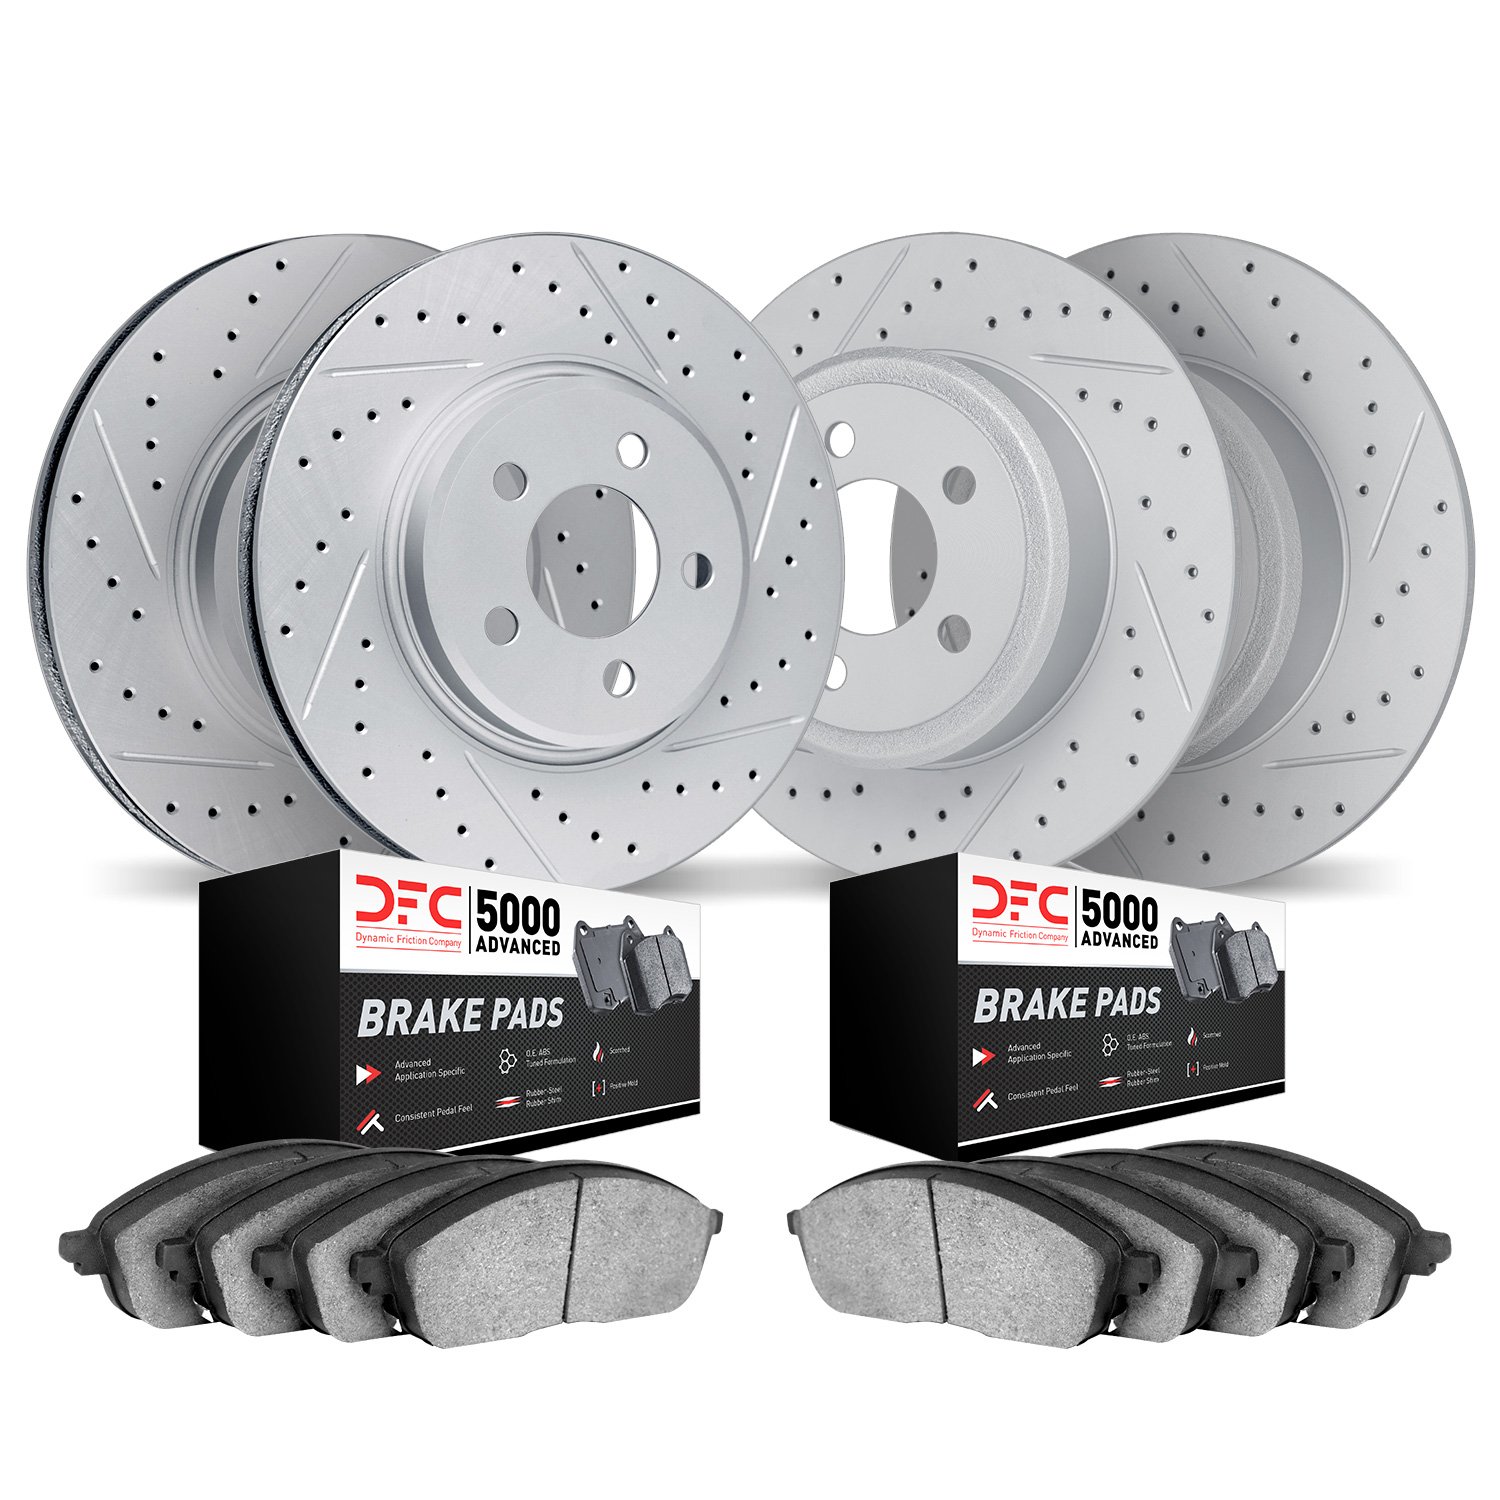 2504-54302 Geoperformance Drilled/Slotted Rotors w/5000 Advanced Brake Pads Kit, 2020-2020 Ford/Lincoln/Mercury/Mazda, Position: